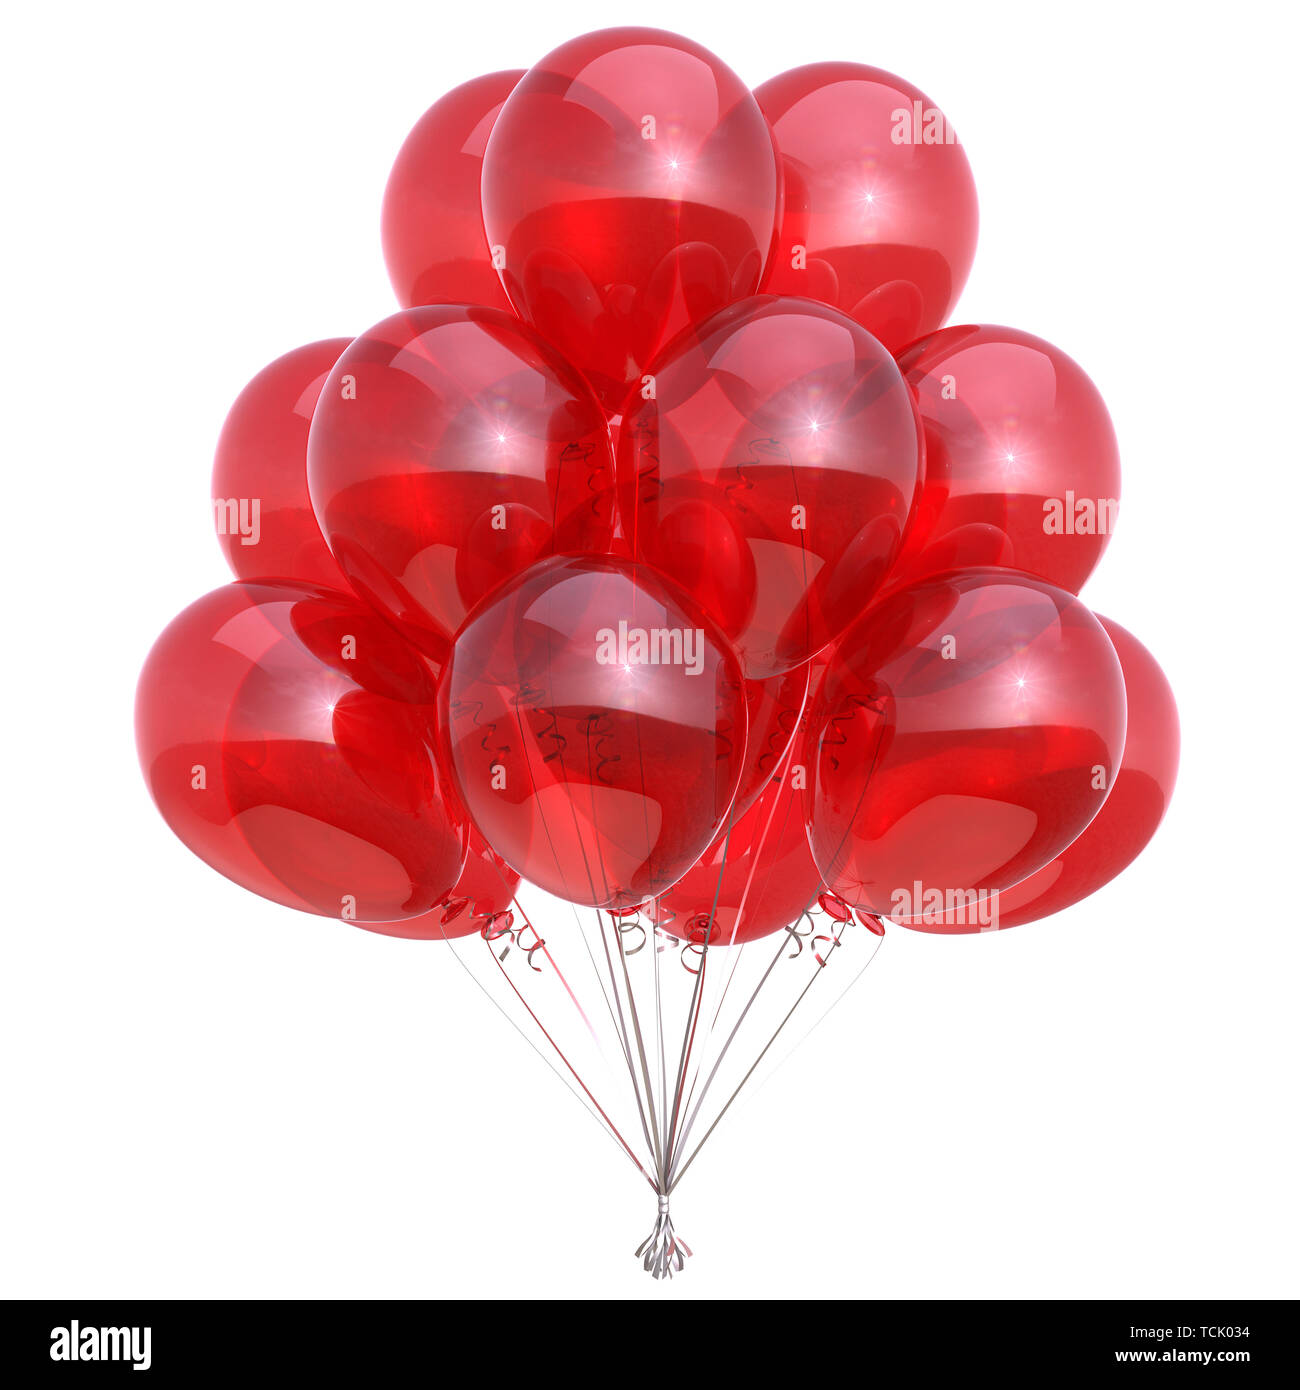 Colorful red balloon bunch shiny, birthday party decoration sparkling,  helium balloons glossy. Happy holiday, anniversary celebration, fun symbol.  3d Stock Photo - Alamy